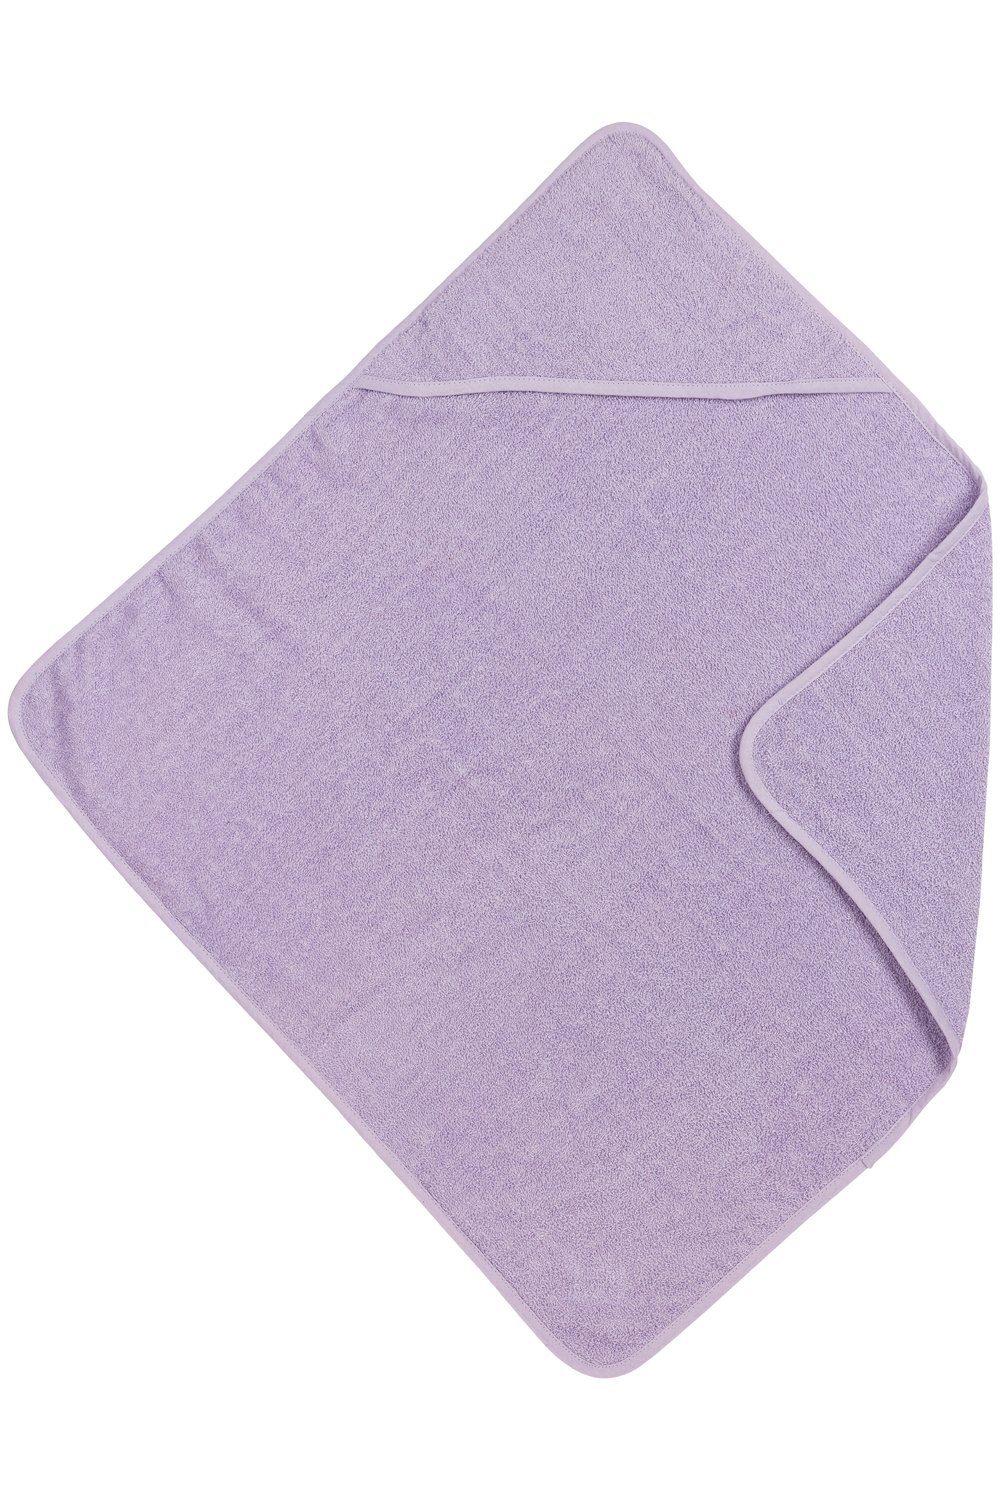 Meyco Uni Baby Kapuzenhandtuch 75x75cm Soft Frottee Lilac, (1-St),